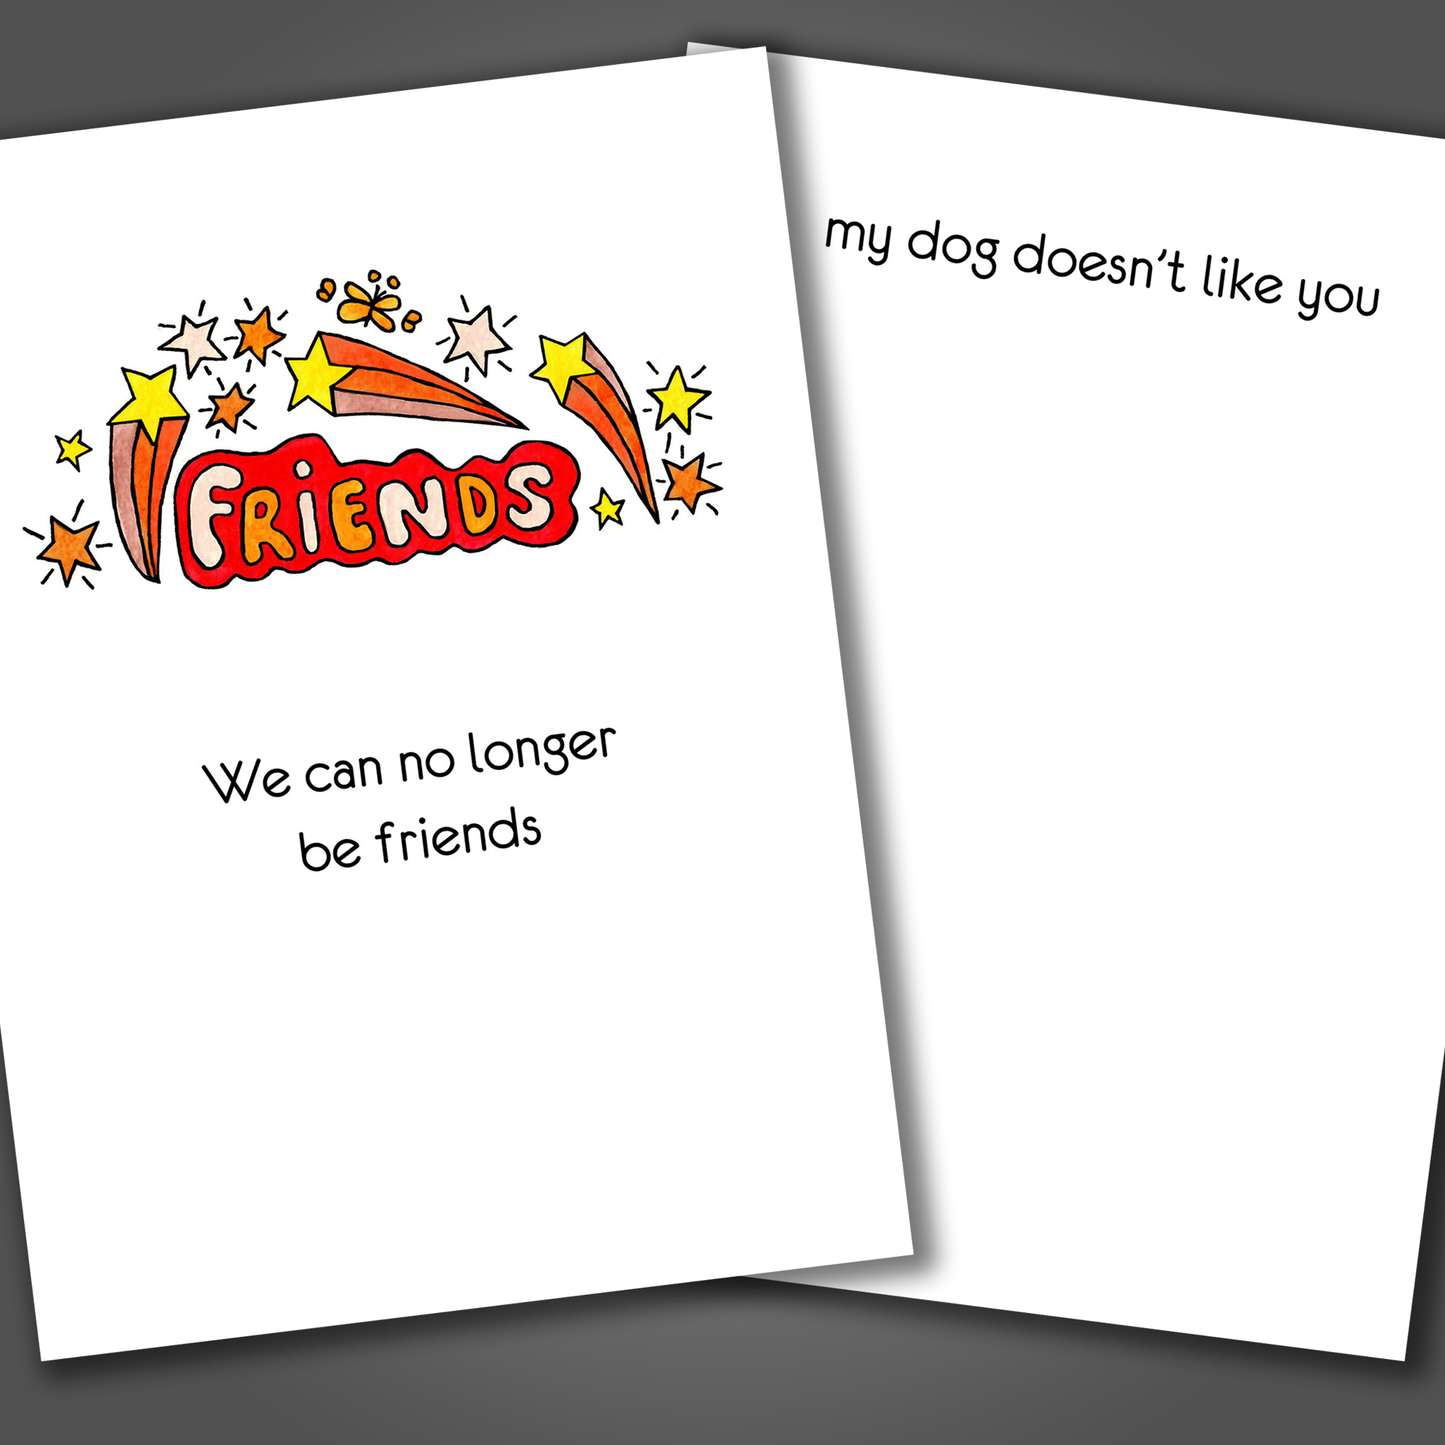 Funny friendship card with the word friends and stars drawn on the front of the card. Inside the card is a funny joke that says we cannot be friends, my dog doesn't like you.